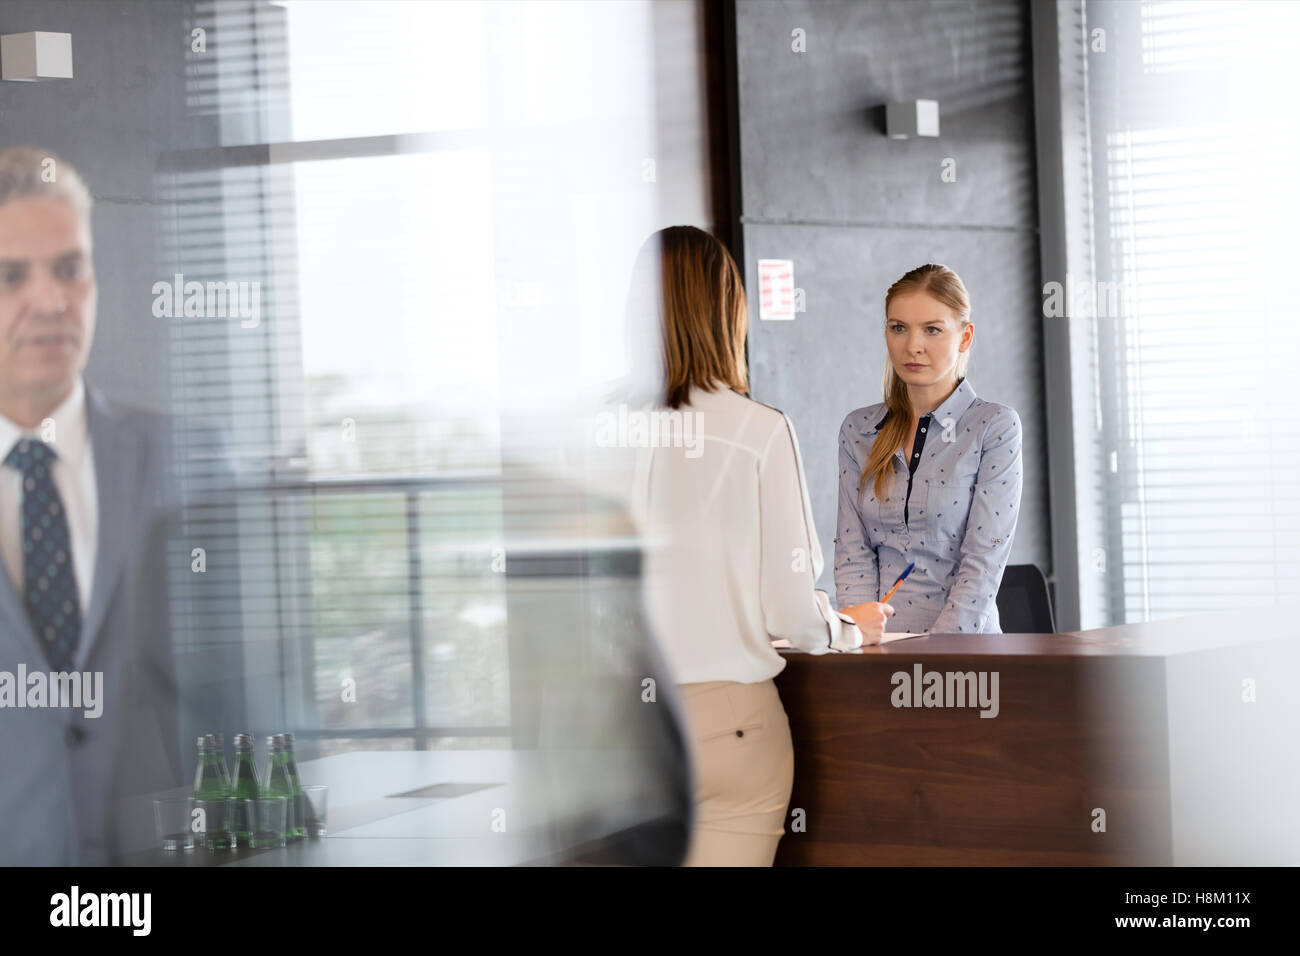 Young businesswoman with female réceptionniste in office Banque D'Images